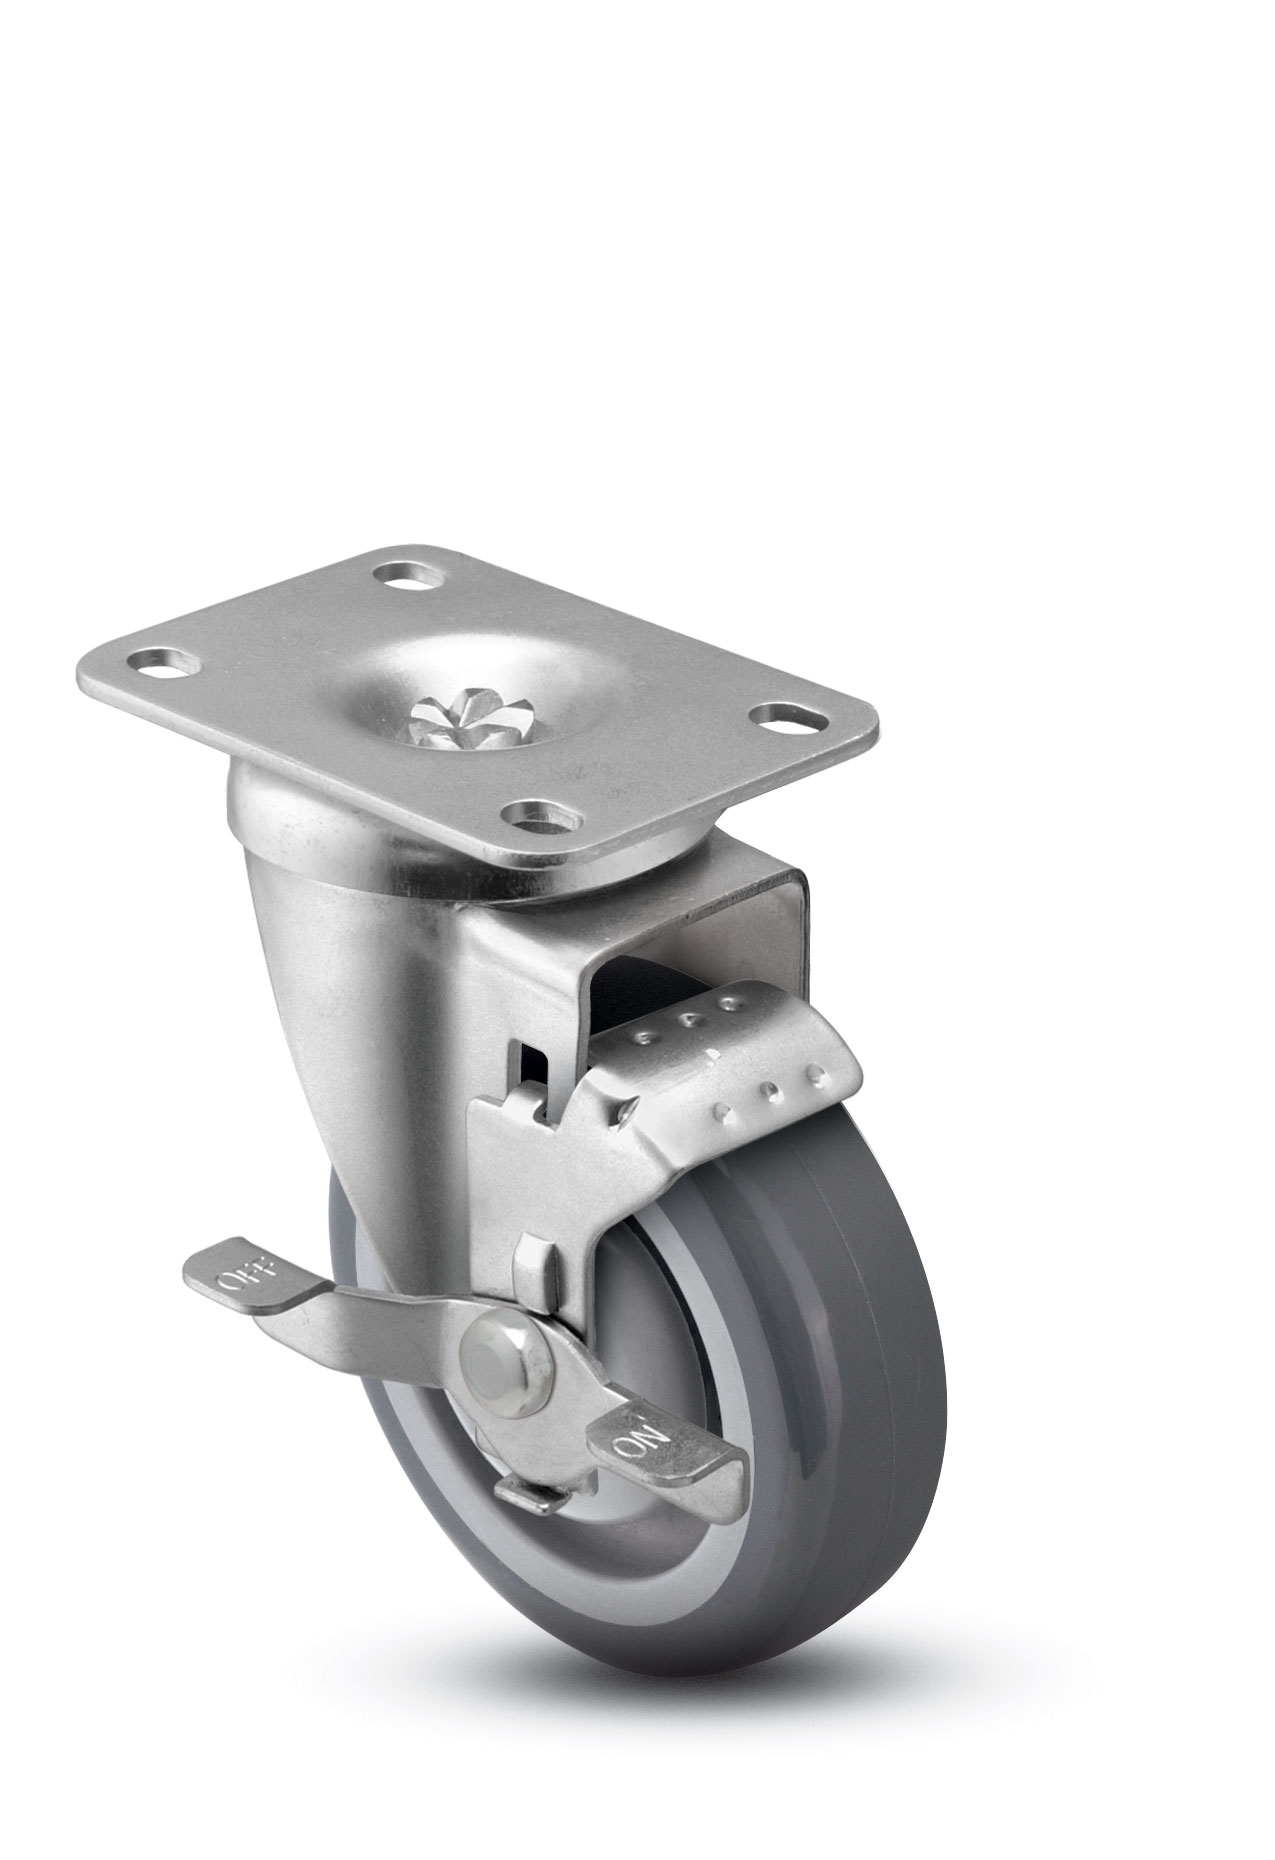 Caster; Swivel; 4"x1-1/4"; Gray TPR Rubber; Plate (2-5/8x3-3/4; holes: 1-3/4x2-3/4 slotted to 3; 5/16 bolt); Prec Ball Brng; 280#; Dustcap; Bearing Cover; Brake (Item #65152)